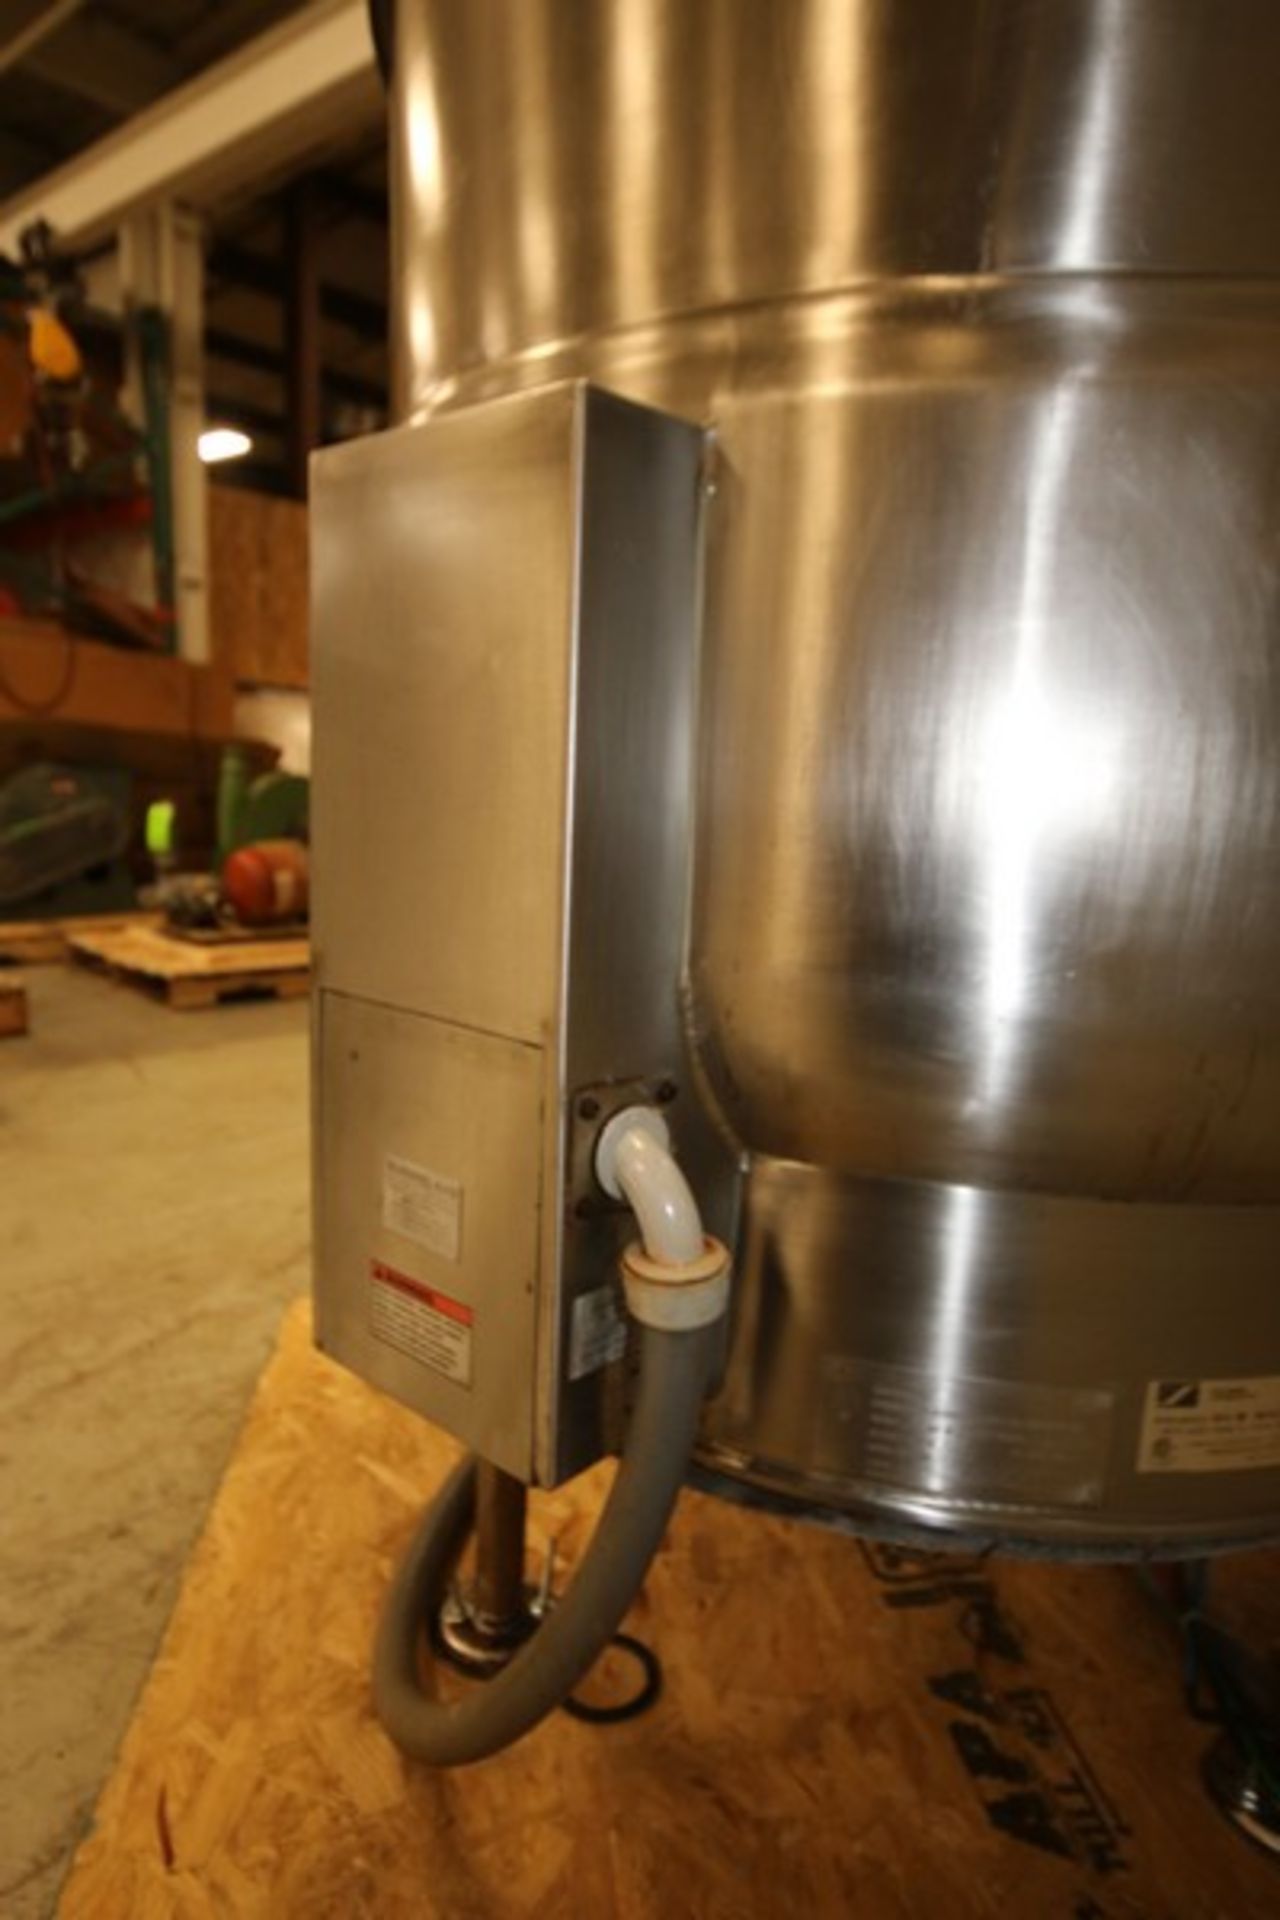 Southbend 100 Gallon S/S Jacketed Electric Kettle, Model KELS-100, SN 67090-7Z-3431 with 3" CT - Image 6 of 9